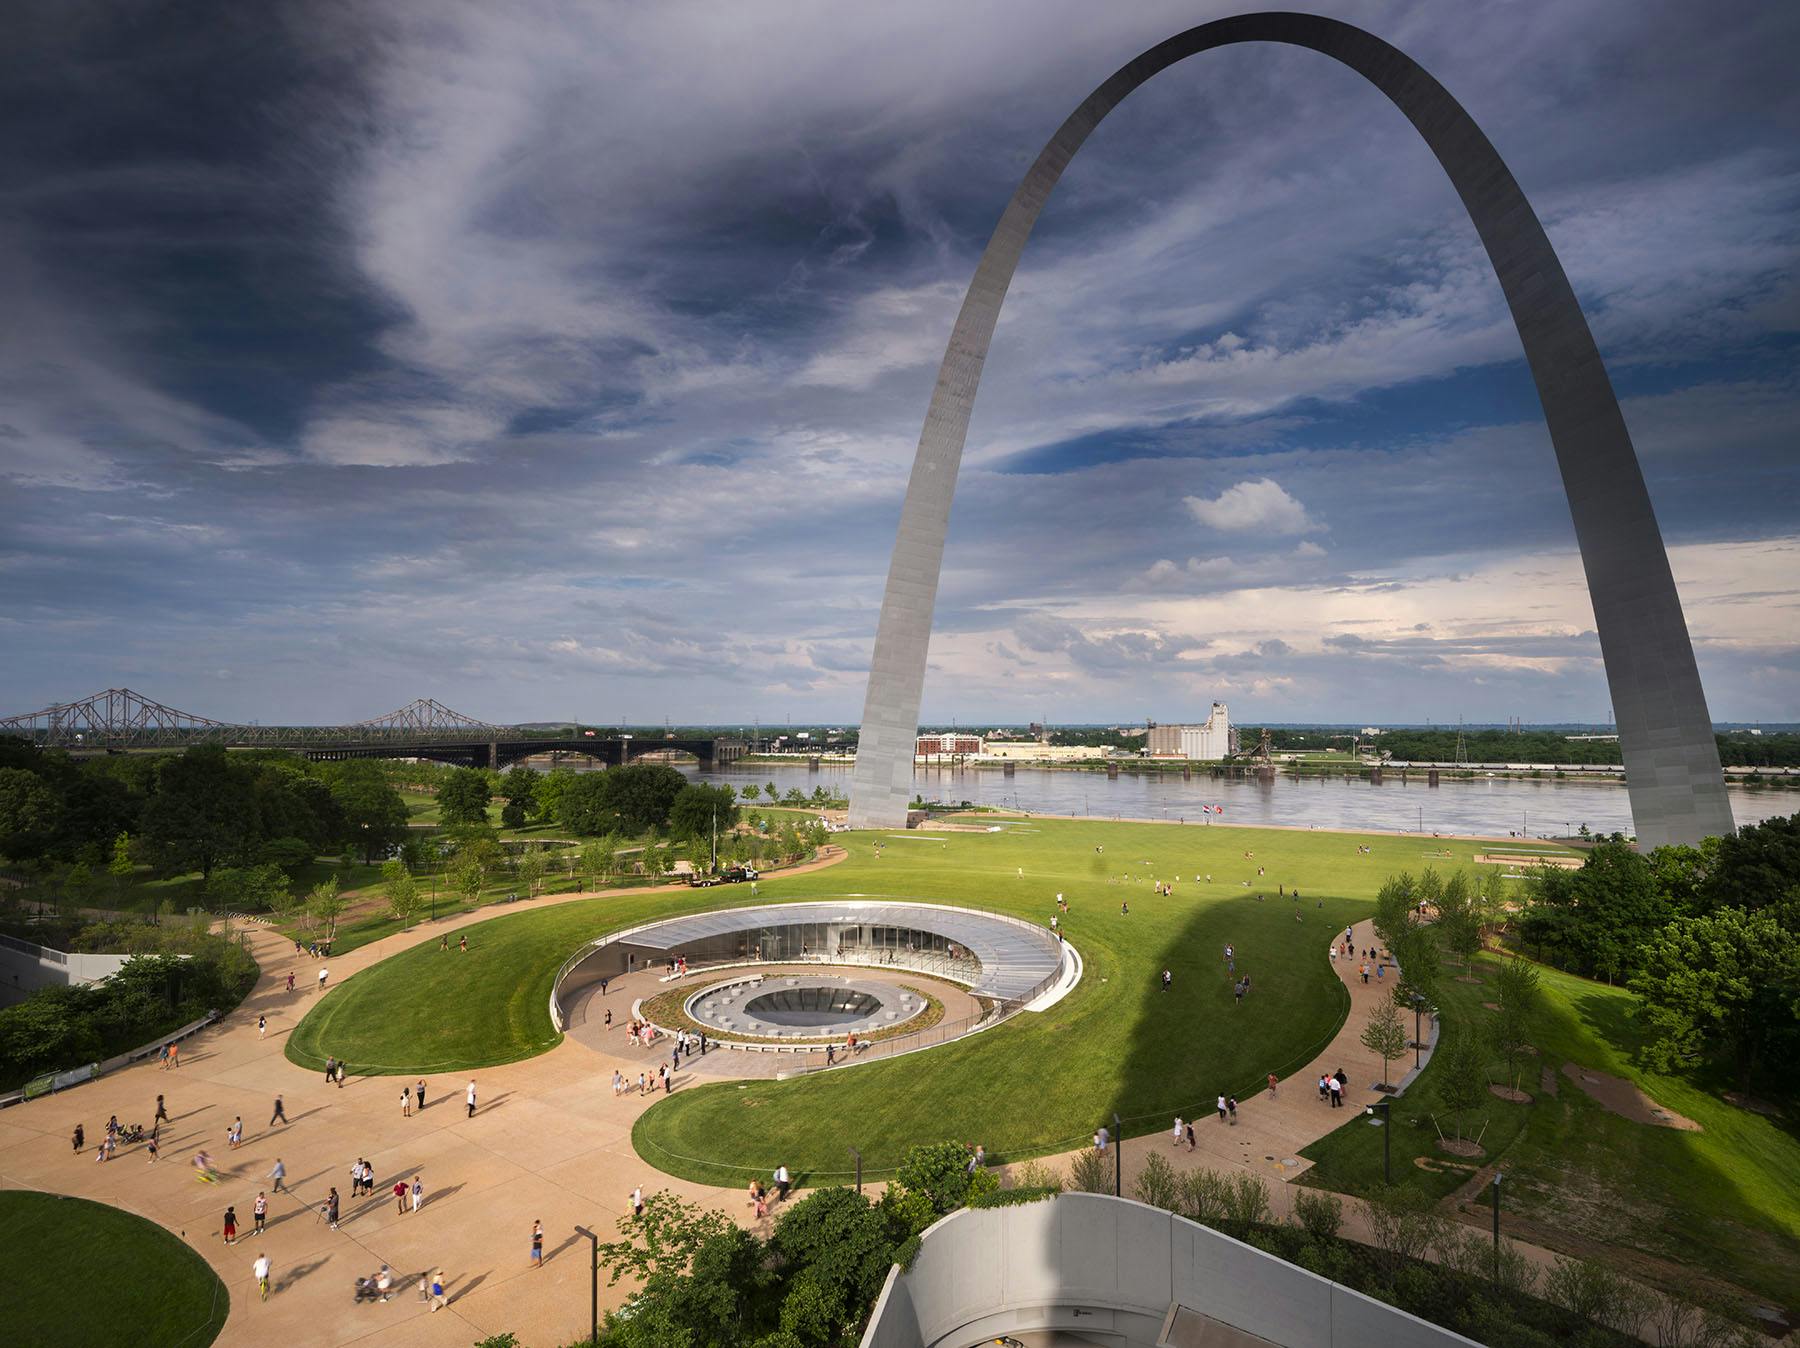 Cooper Robertson emphasizes Universal Design in new Gateway Arch Museum | News | Archinect